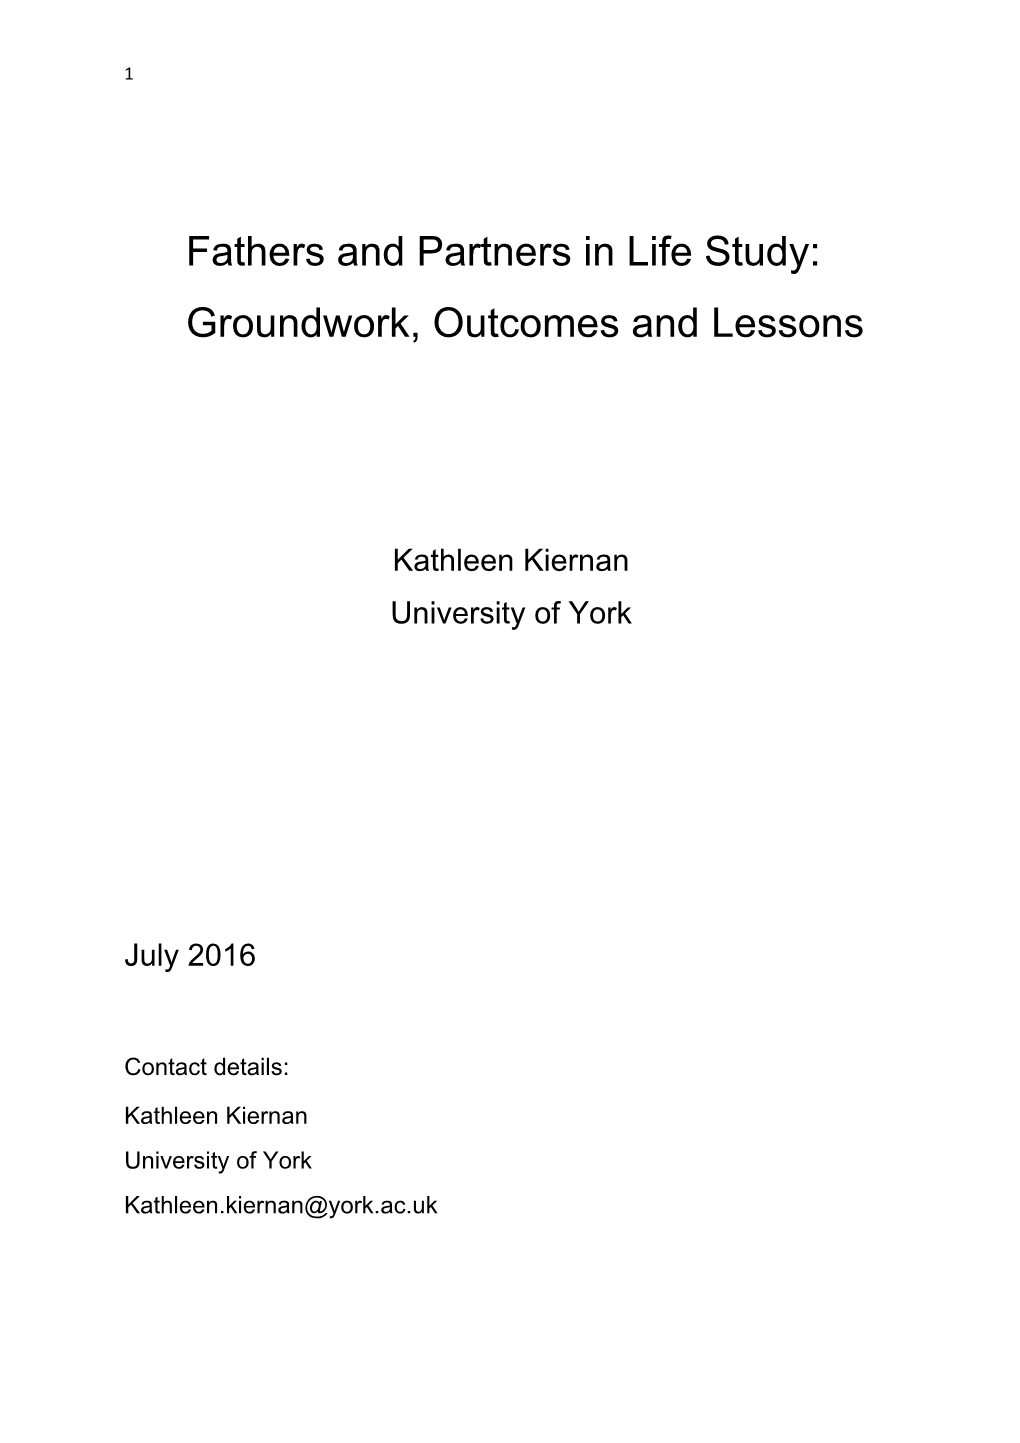 Fathers and Partners in Life Study